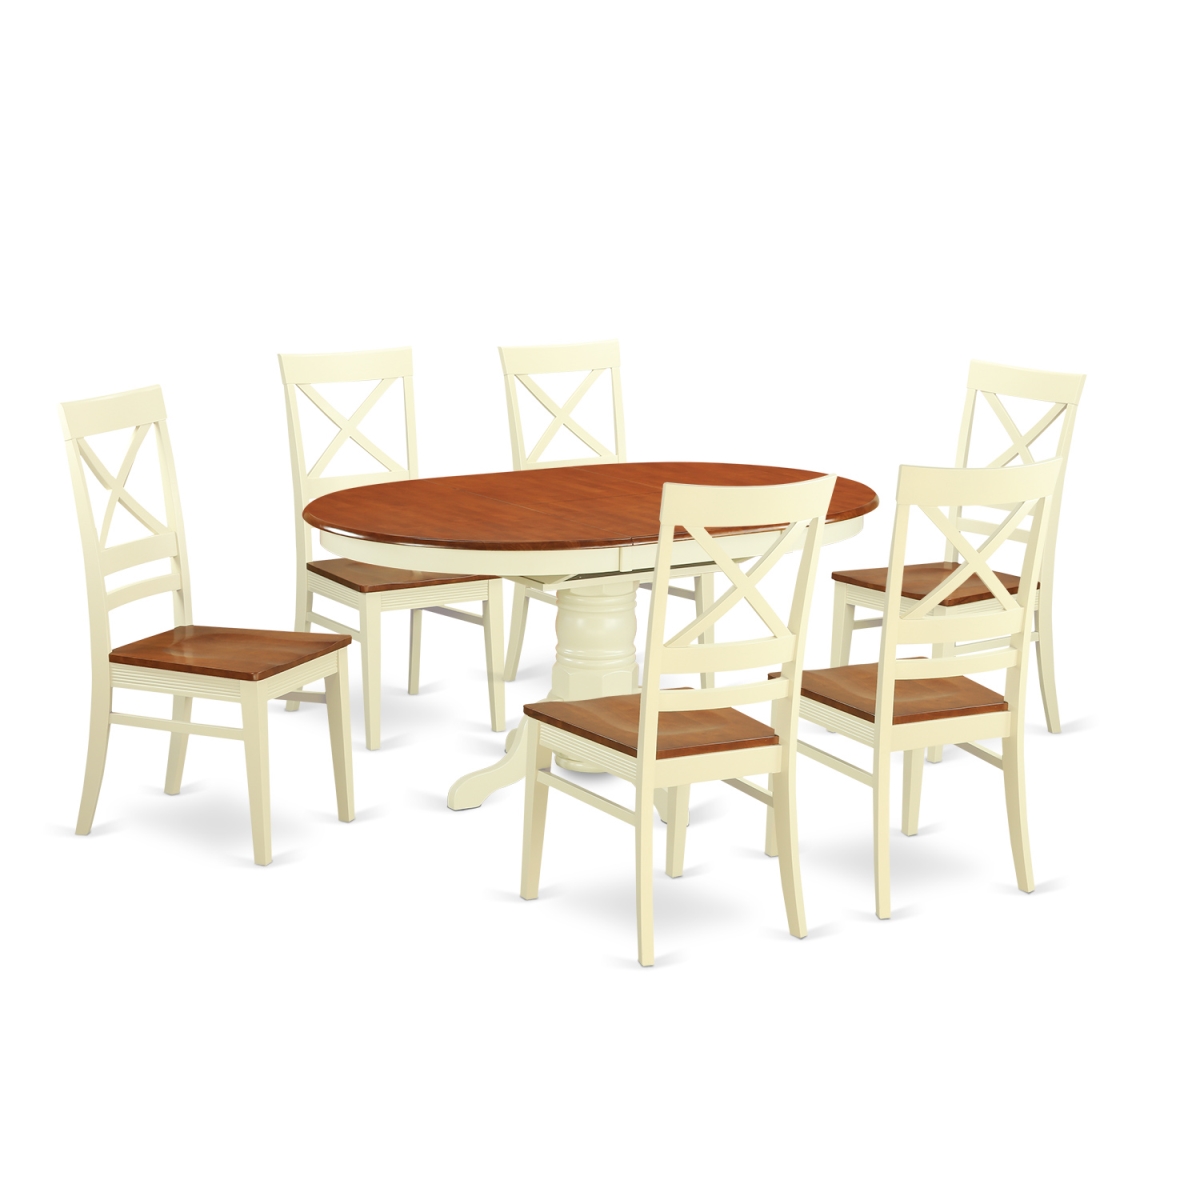 Picture of East West Furniture AVQU7-WHI-W Dining Room Sets with 6 Kitchen Table & 6 Chairs, Buttermilk & Cherry - 7 Piece